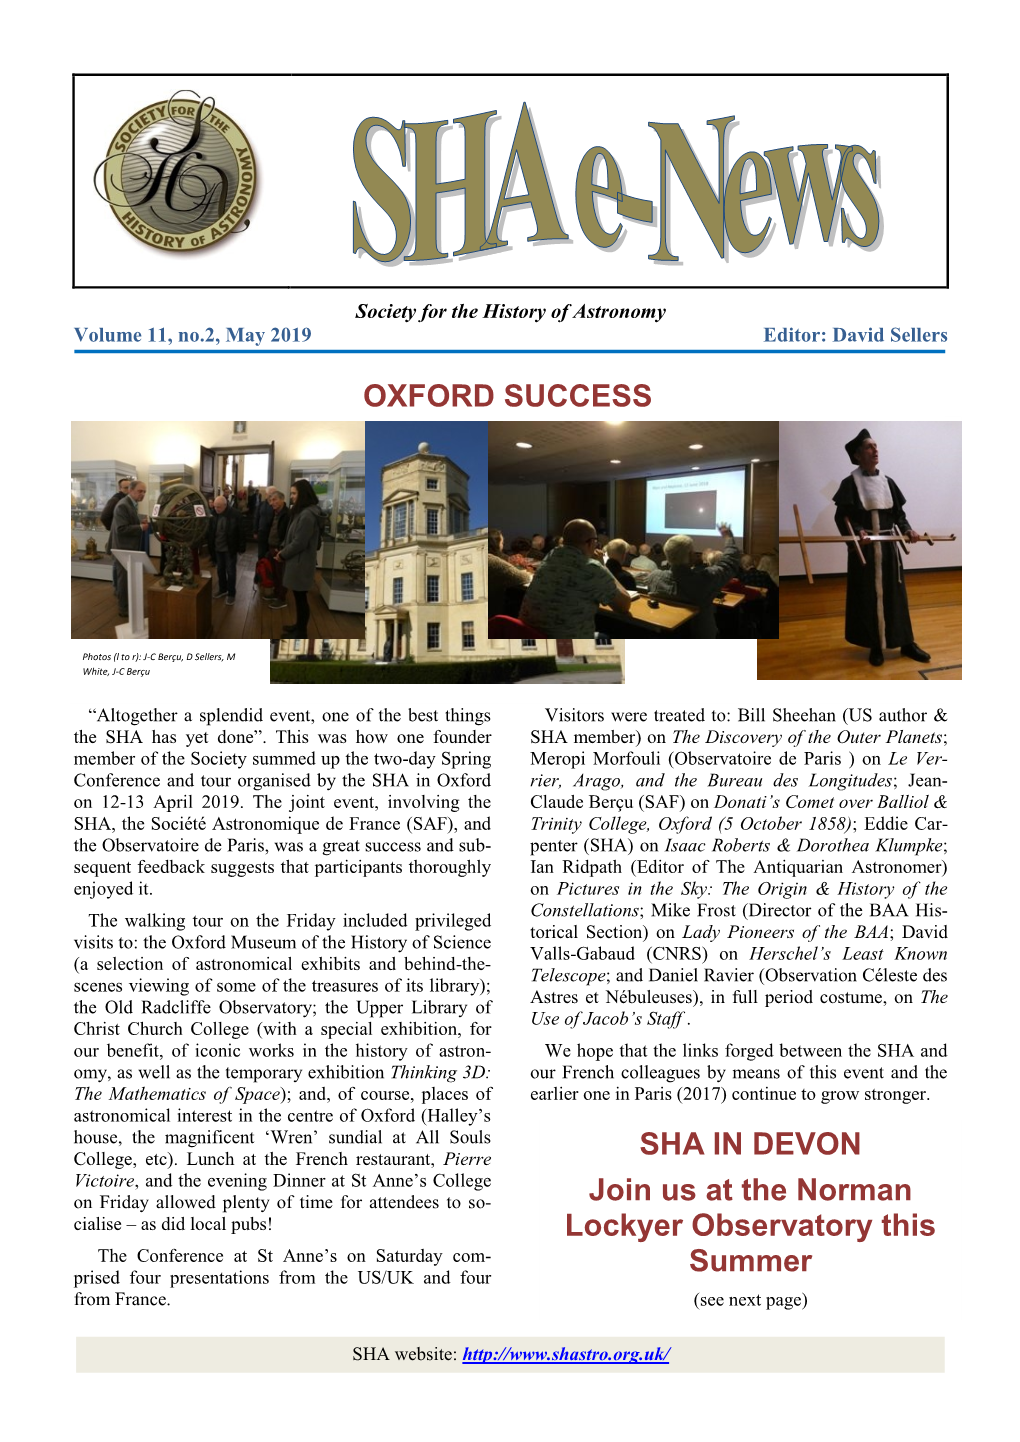 SHA in DEVON Join Us at the Norman Lockyer Observatory This Summer OXFORD SUCCESS